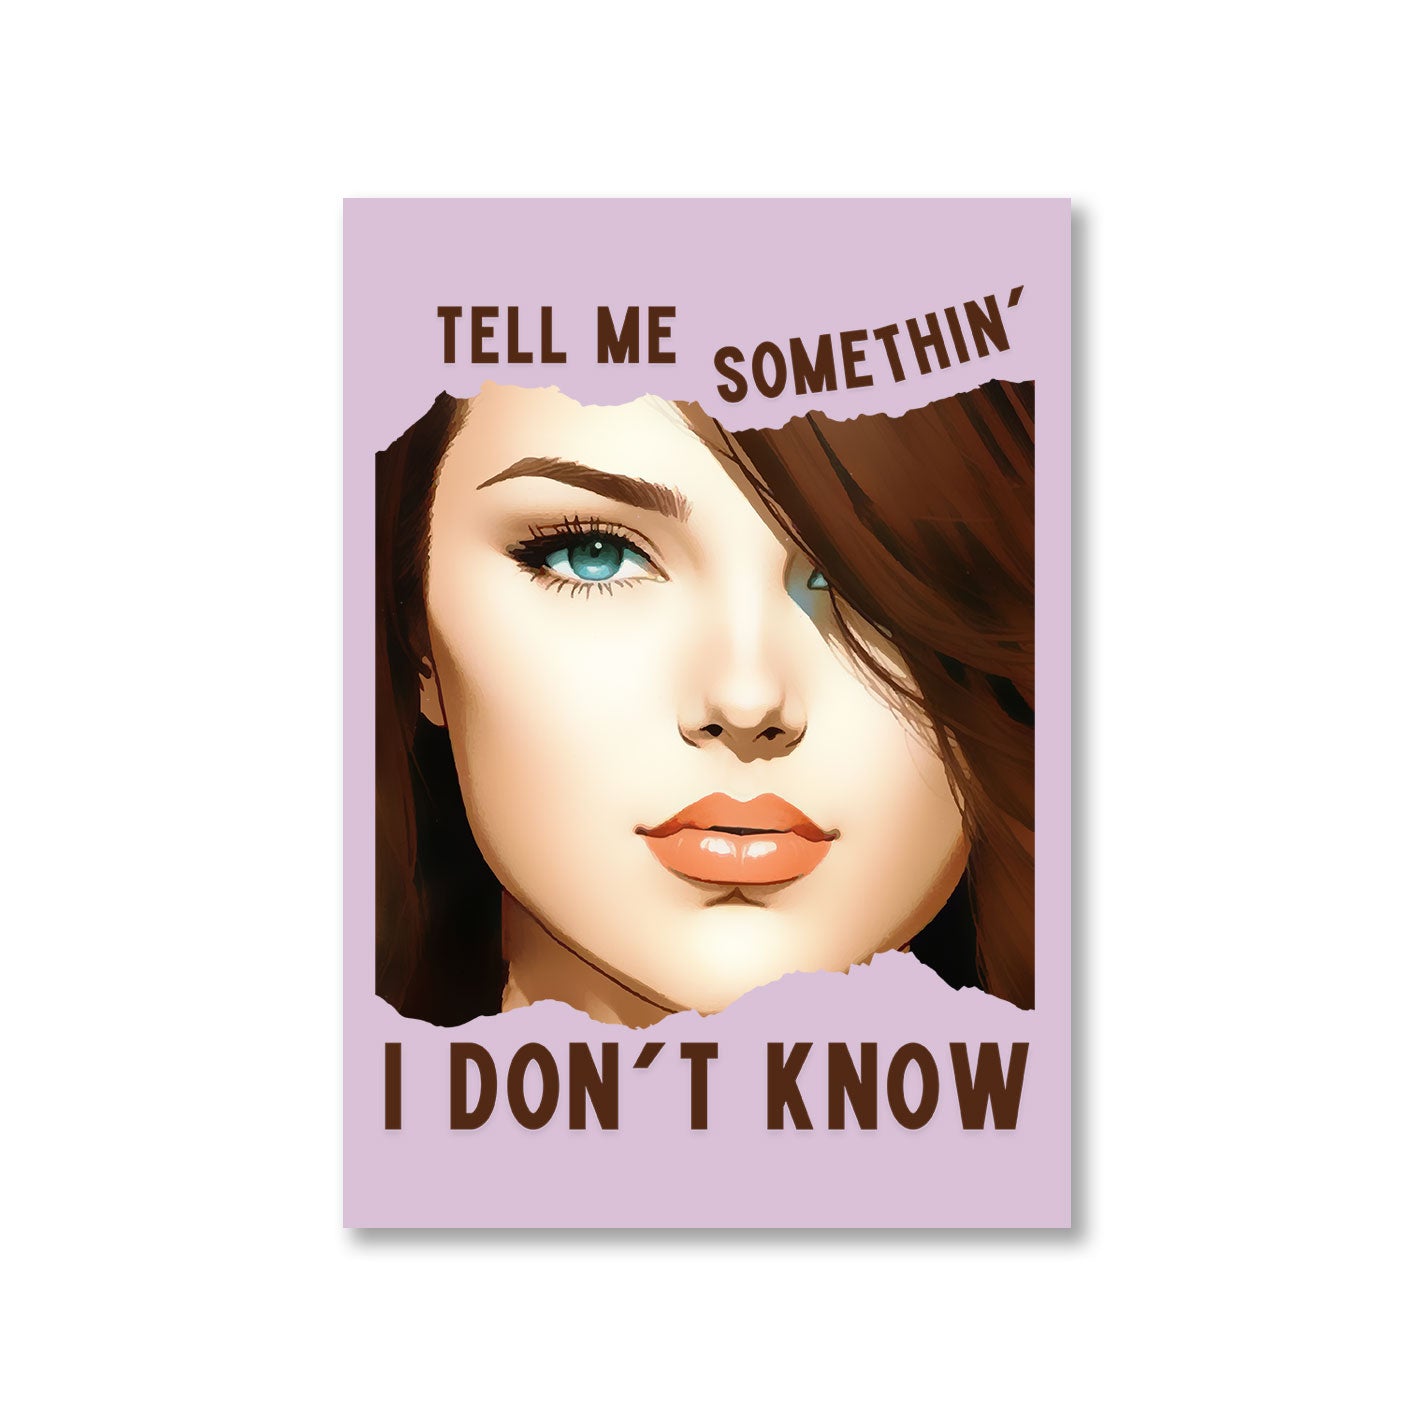 selena gomez tell me something i don't know poster wall art buy online india the banyan tee tbt a4